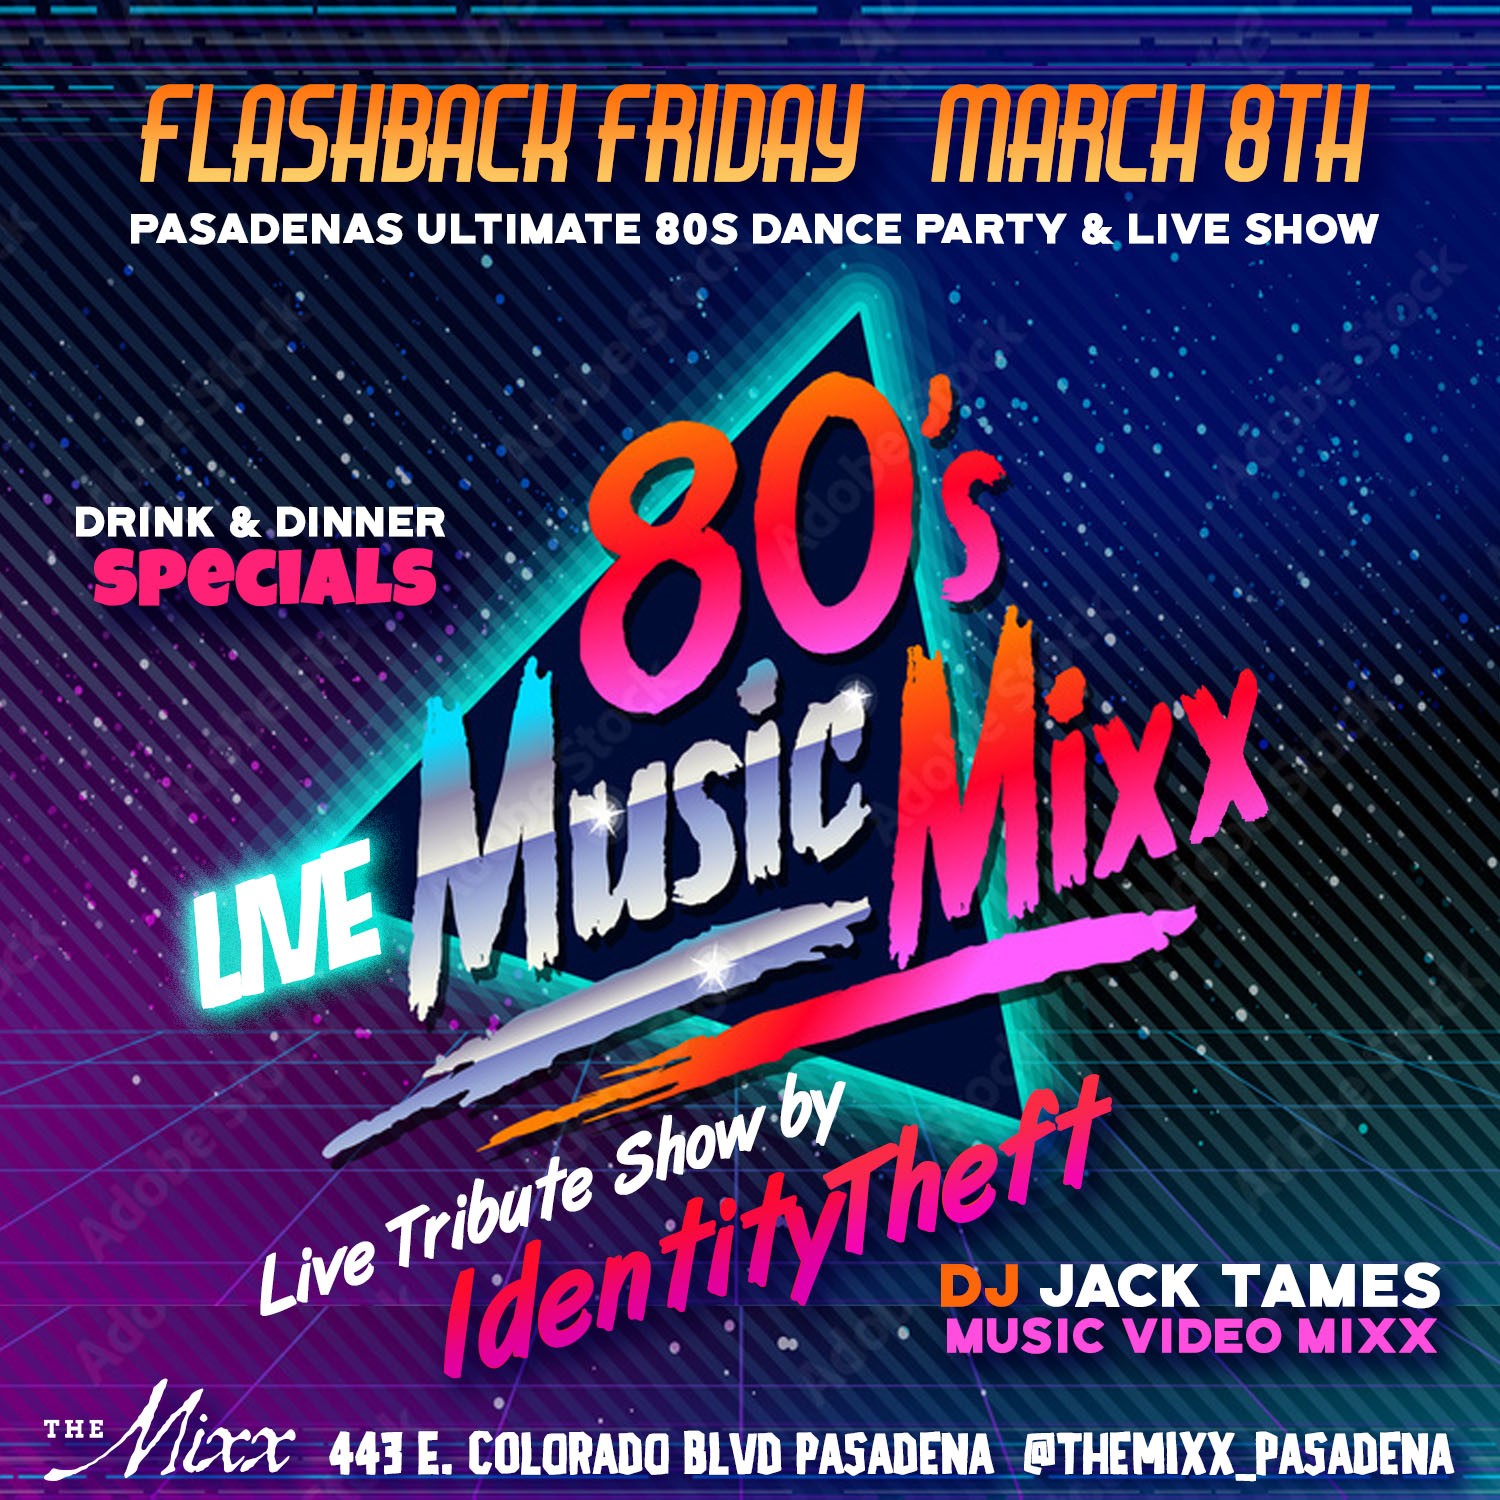 You are currently viewing ULTIMATE 80s Live Tribute Show & Dance Party with Identity Theft